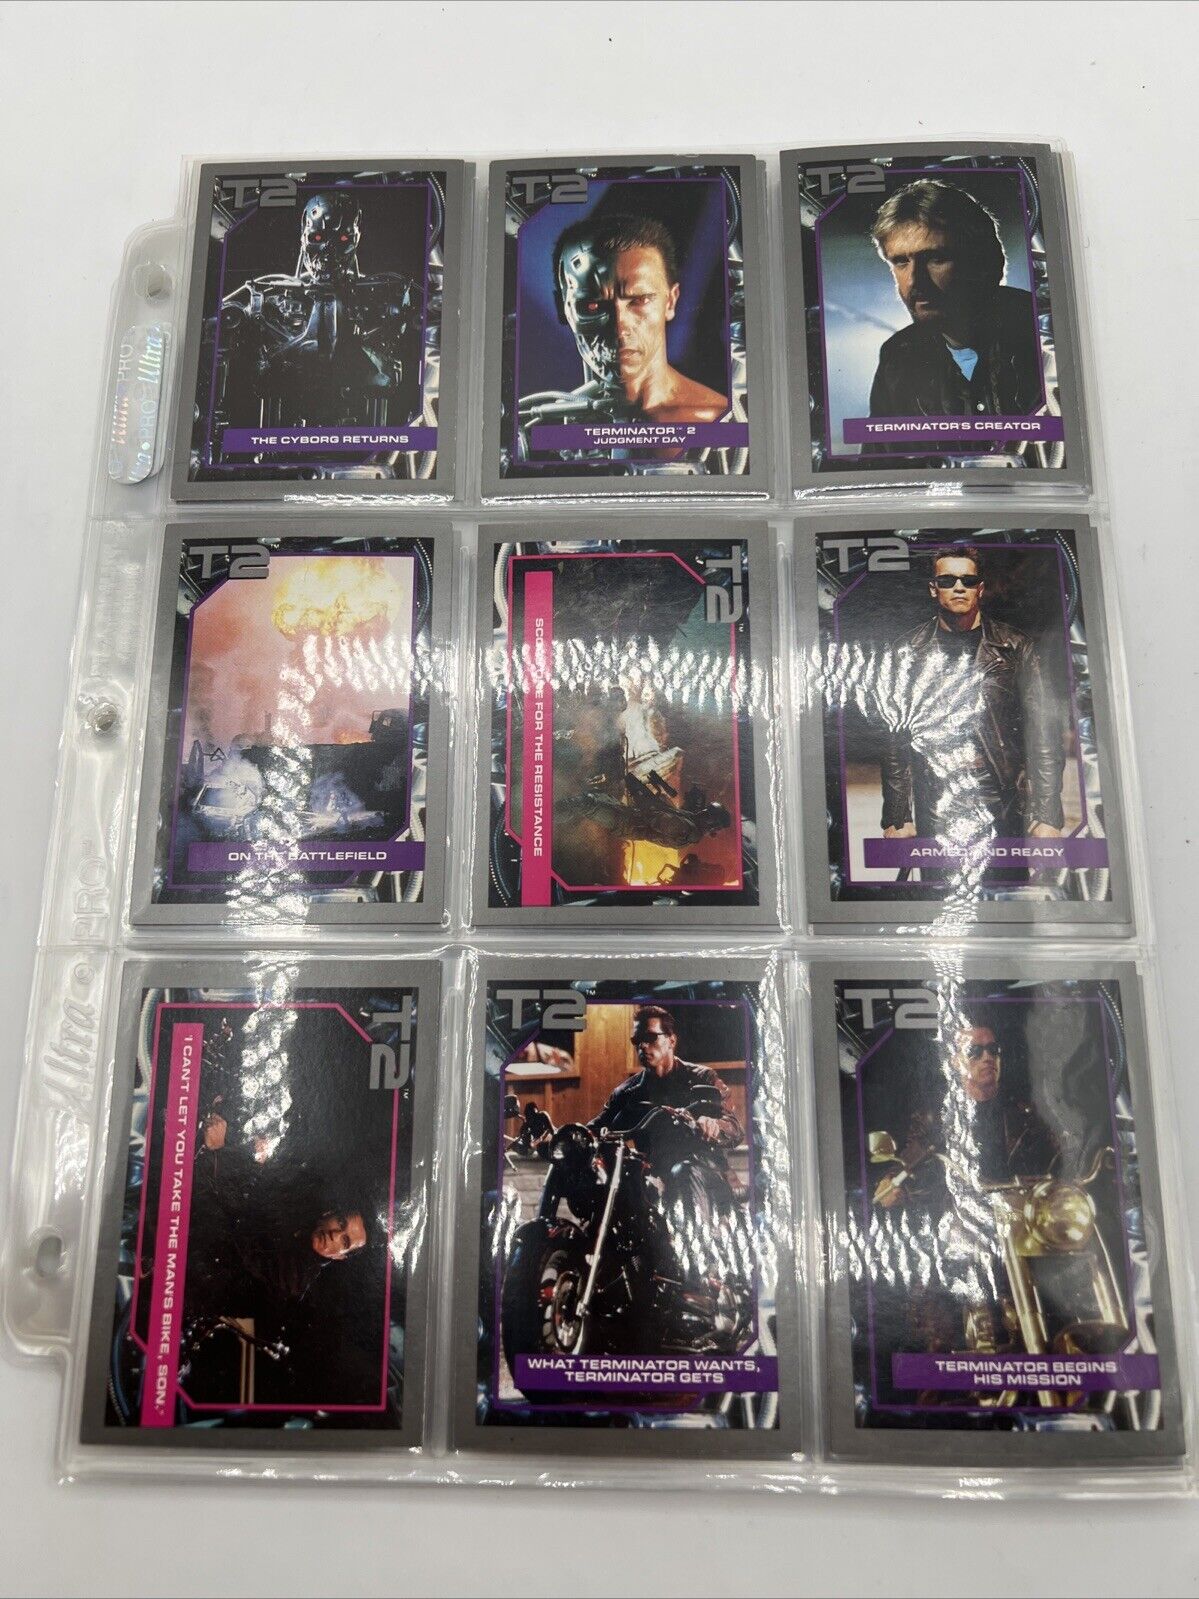 1991 Impel TERMINATOR 2 JUDGMENT DAY TRADING CARDS Complete 140 + 10 Merch Cards